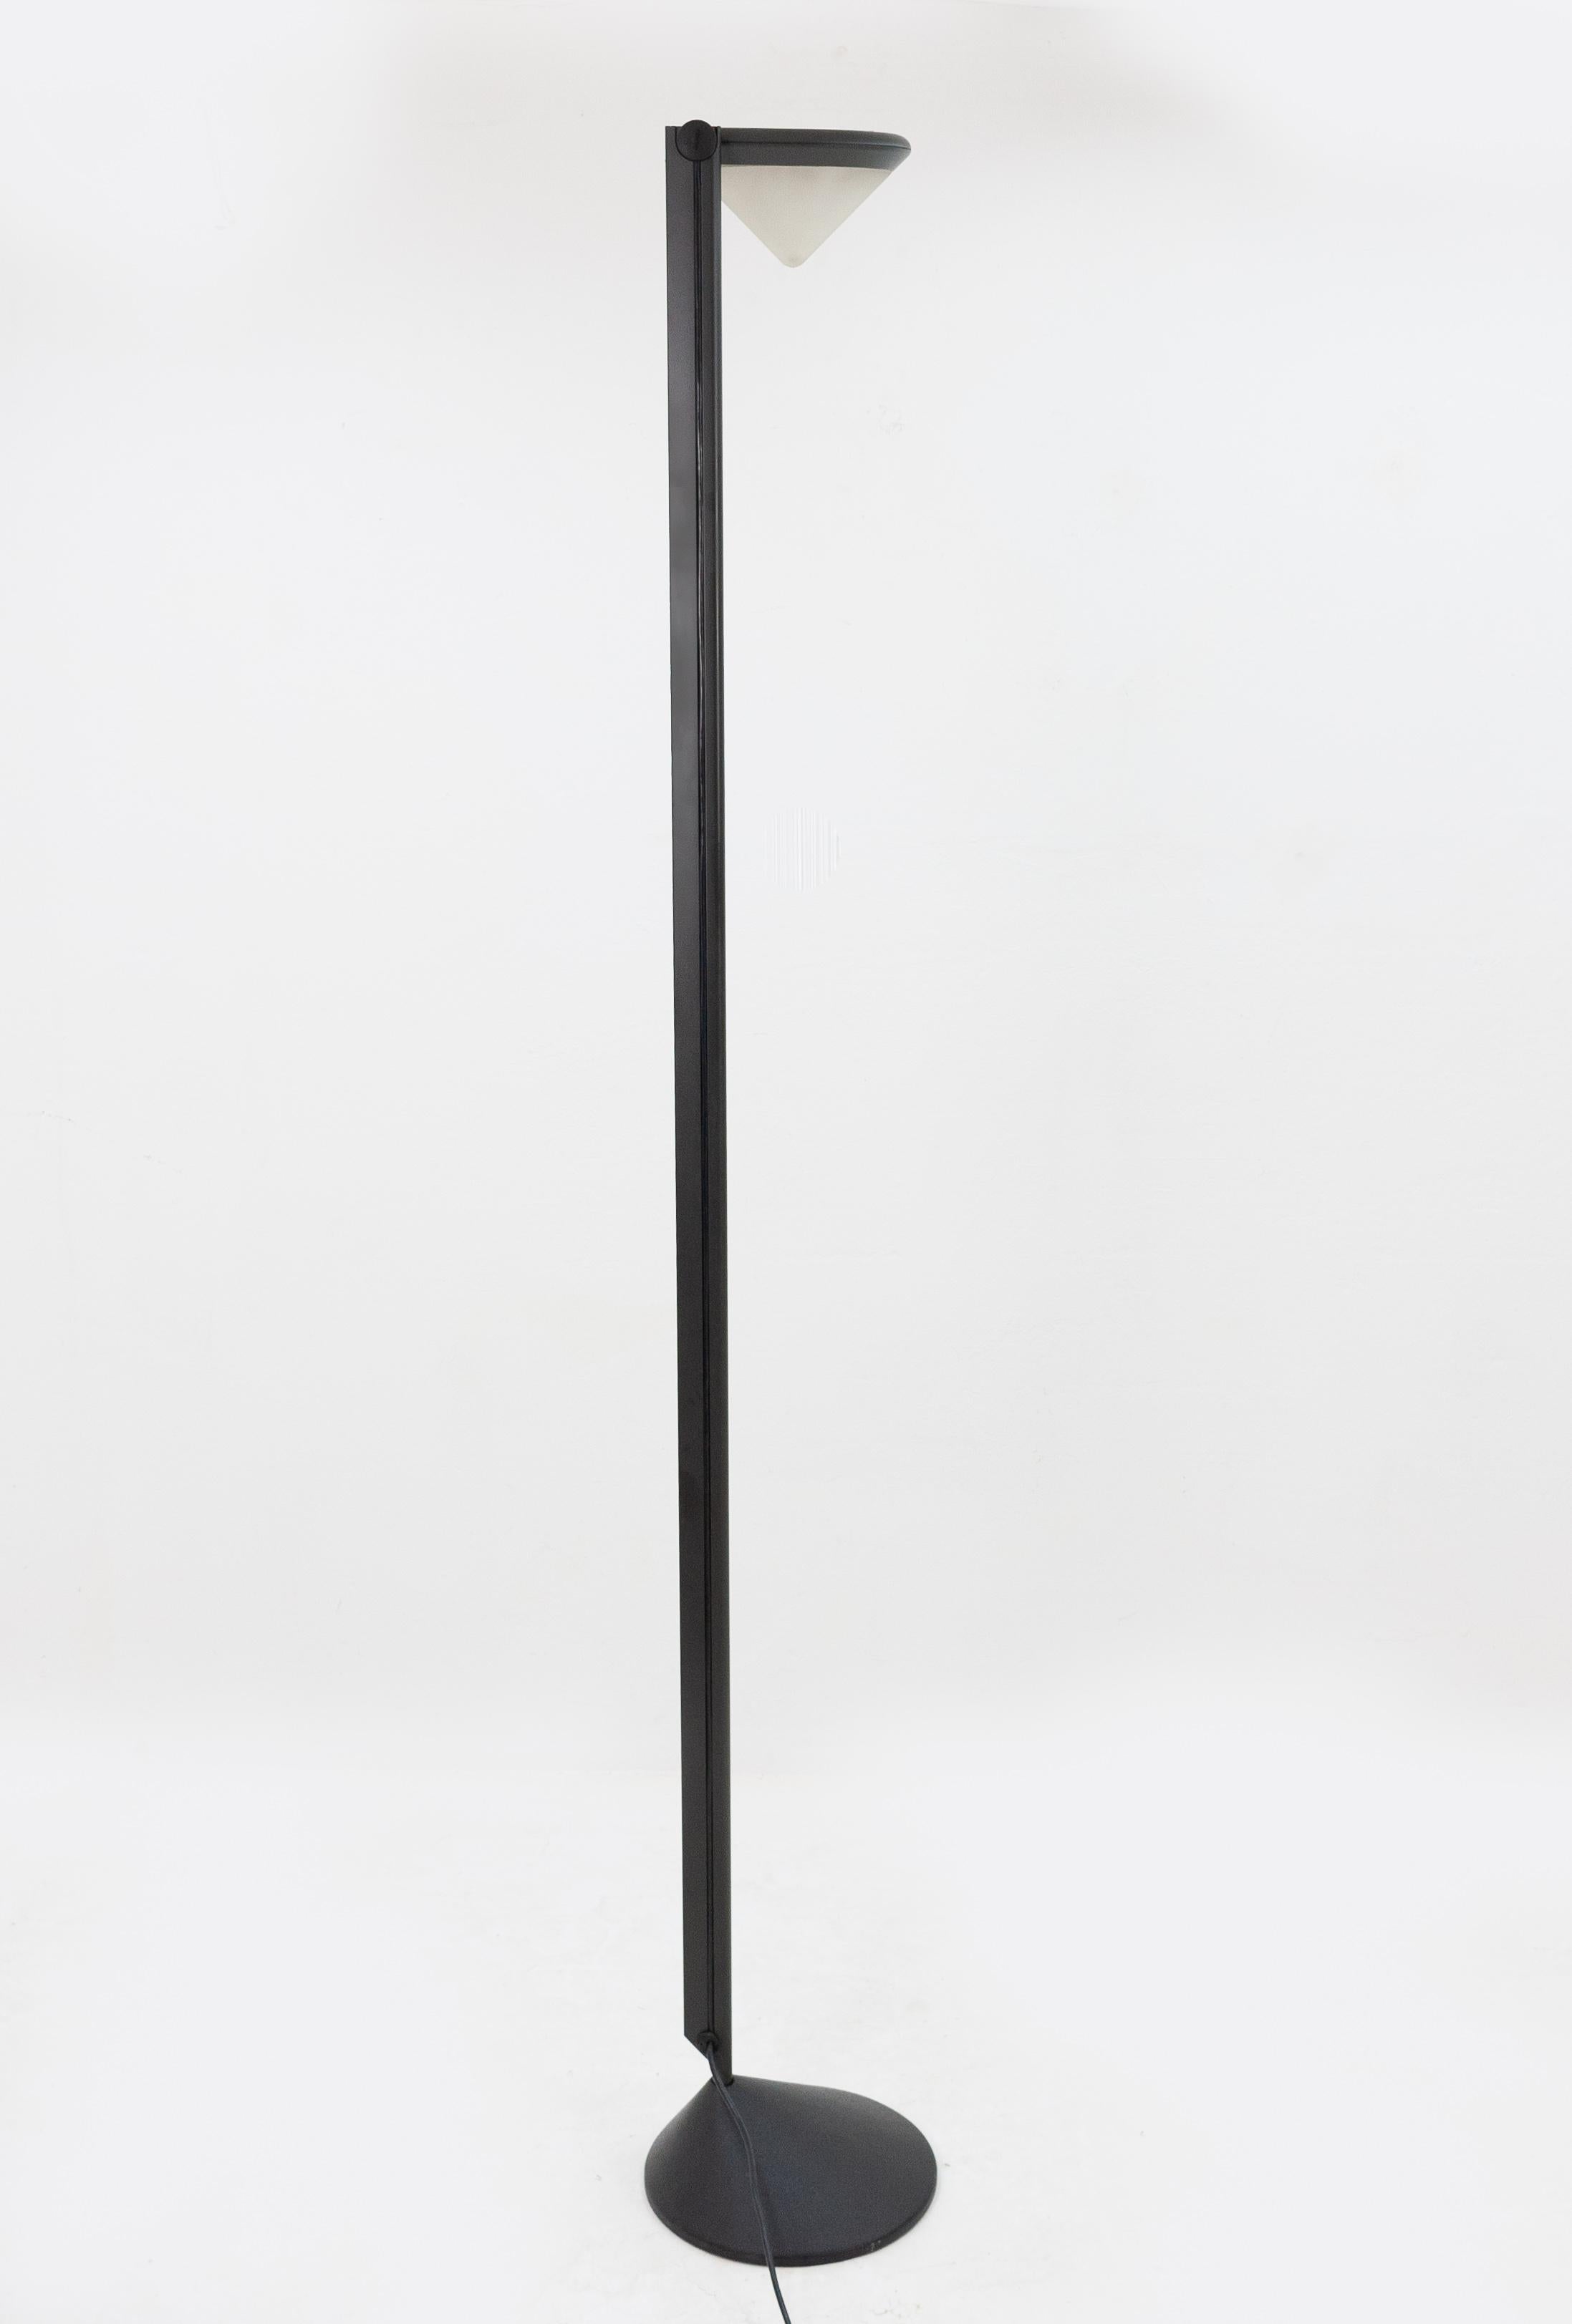 Beautifully designed floor lamp model Eco by Giorgetto Giugiaro for Lucitalia. Halogen light with dimmer, Italy 1980s.